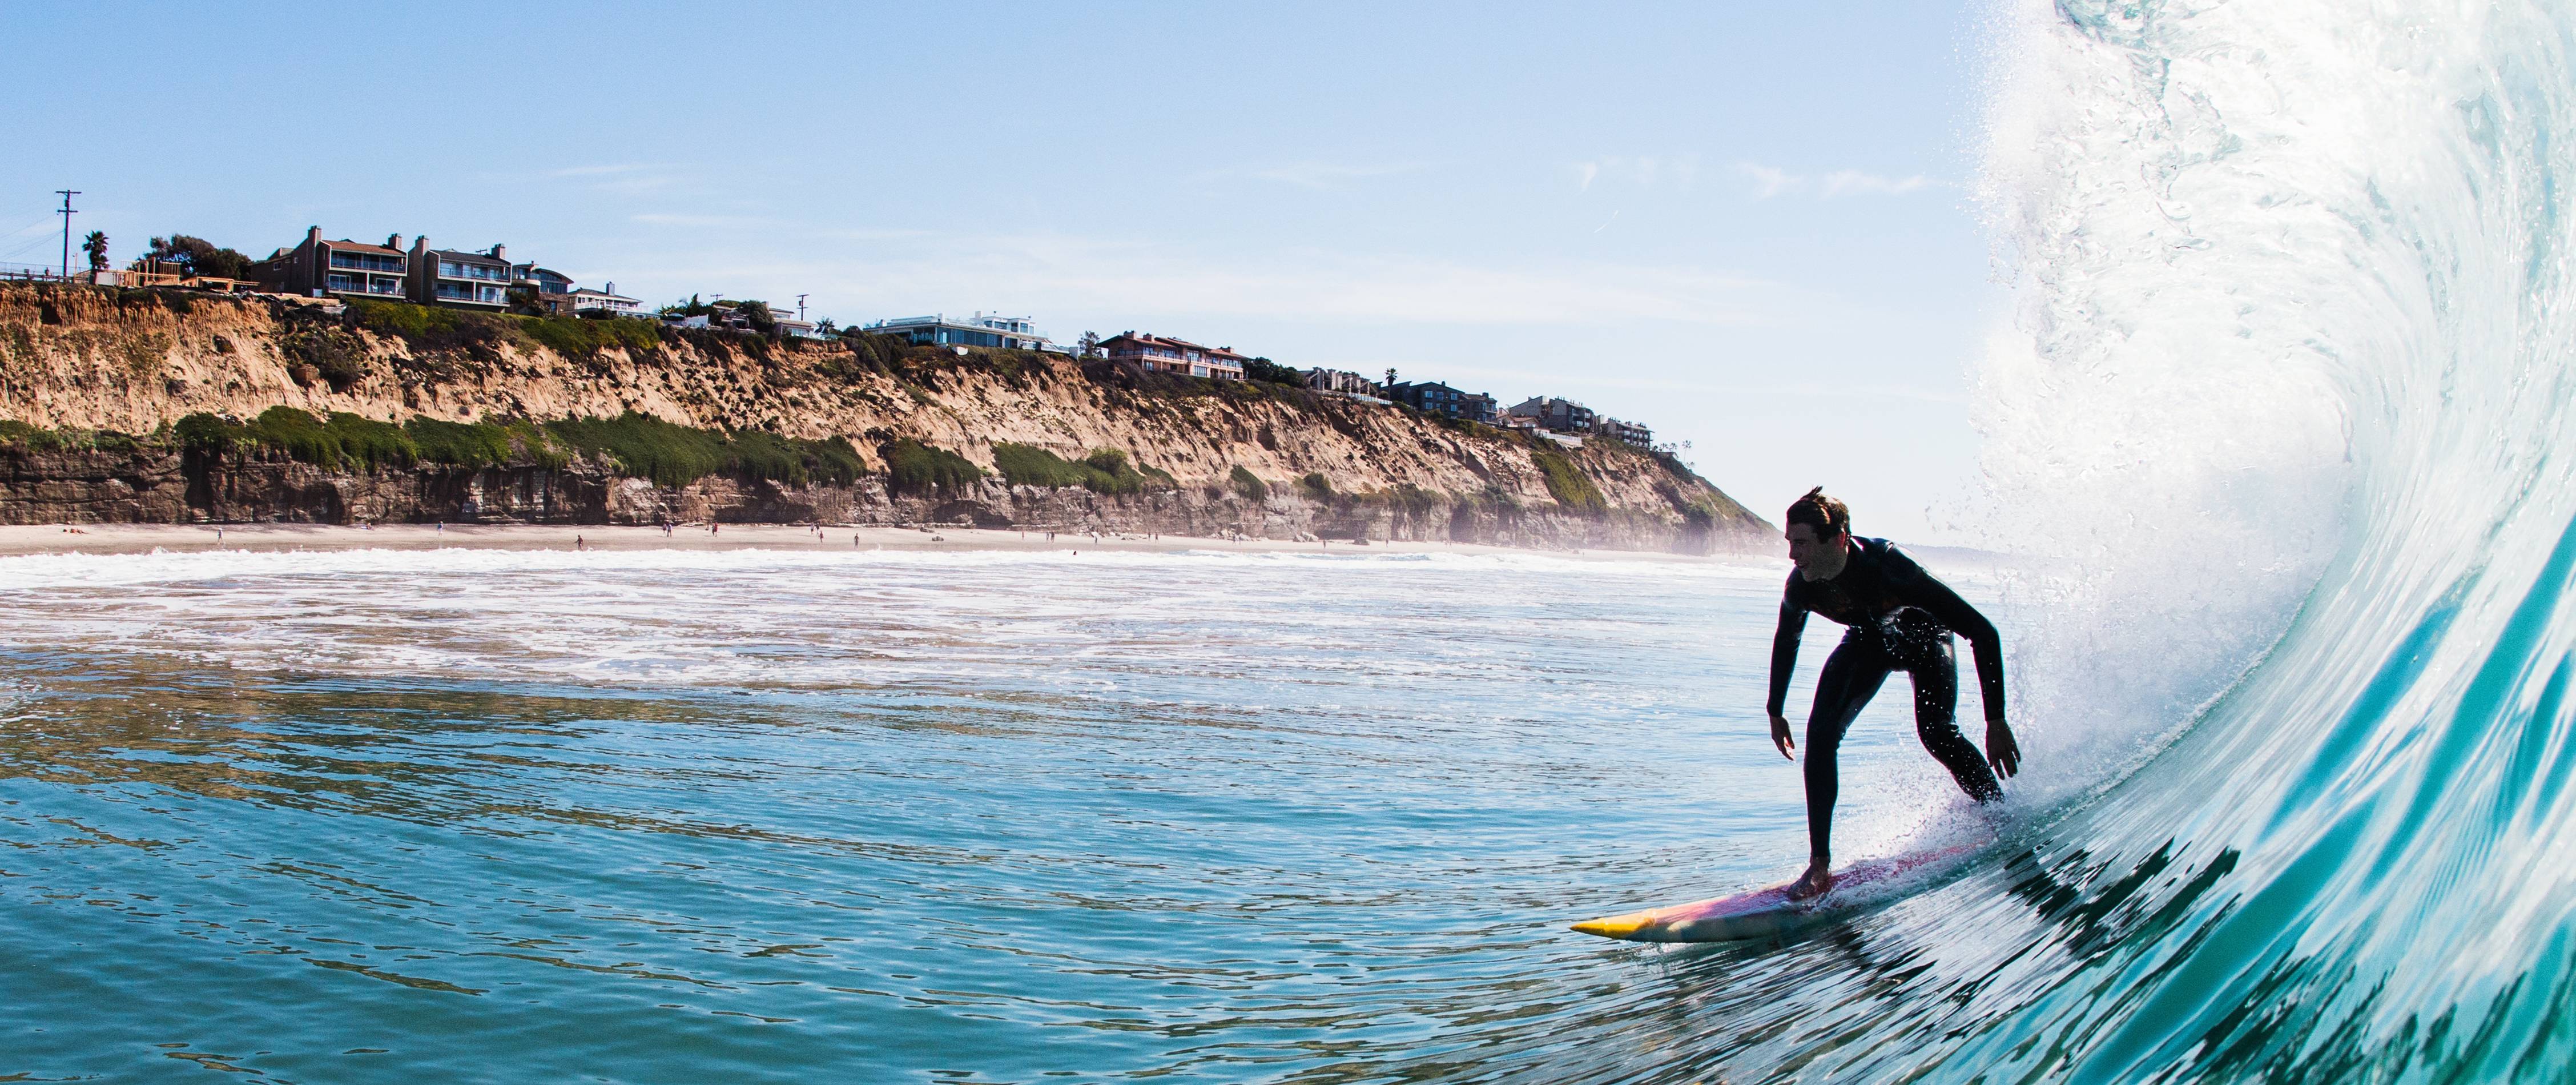 encinitas-surfer-credit-yew!-images-getty-images_Cropped.jpg